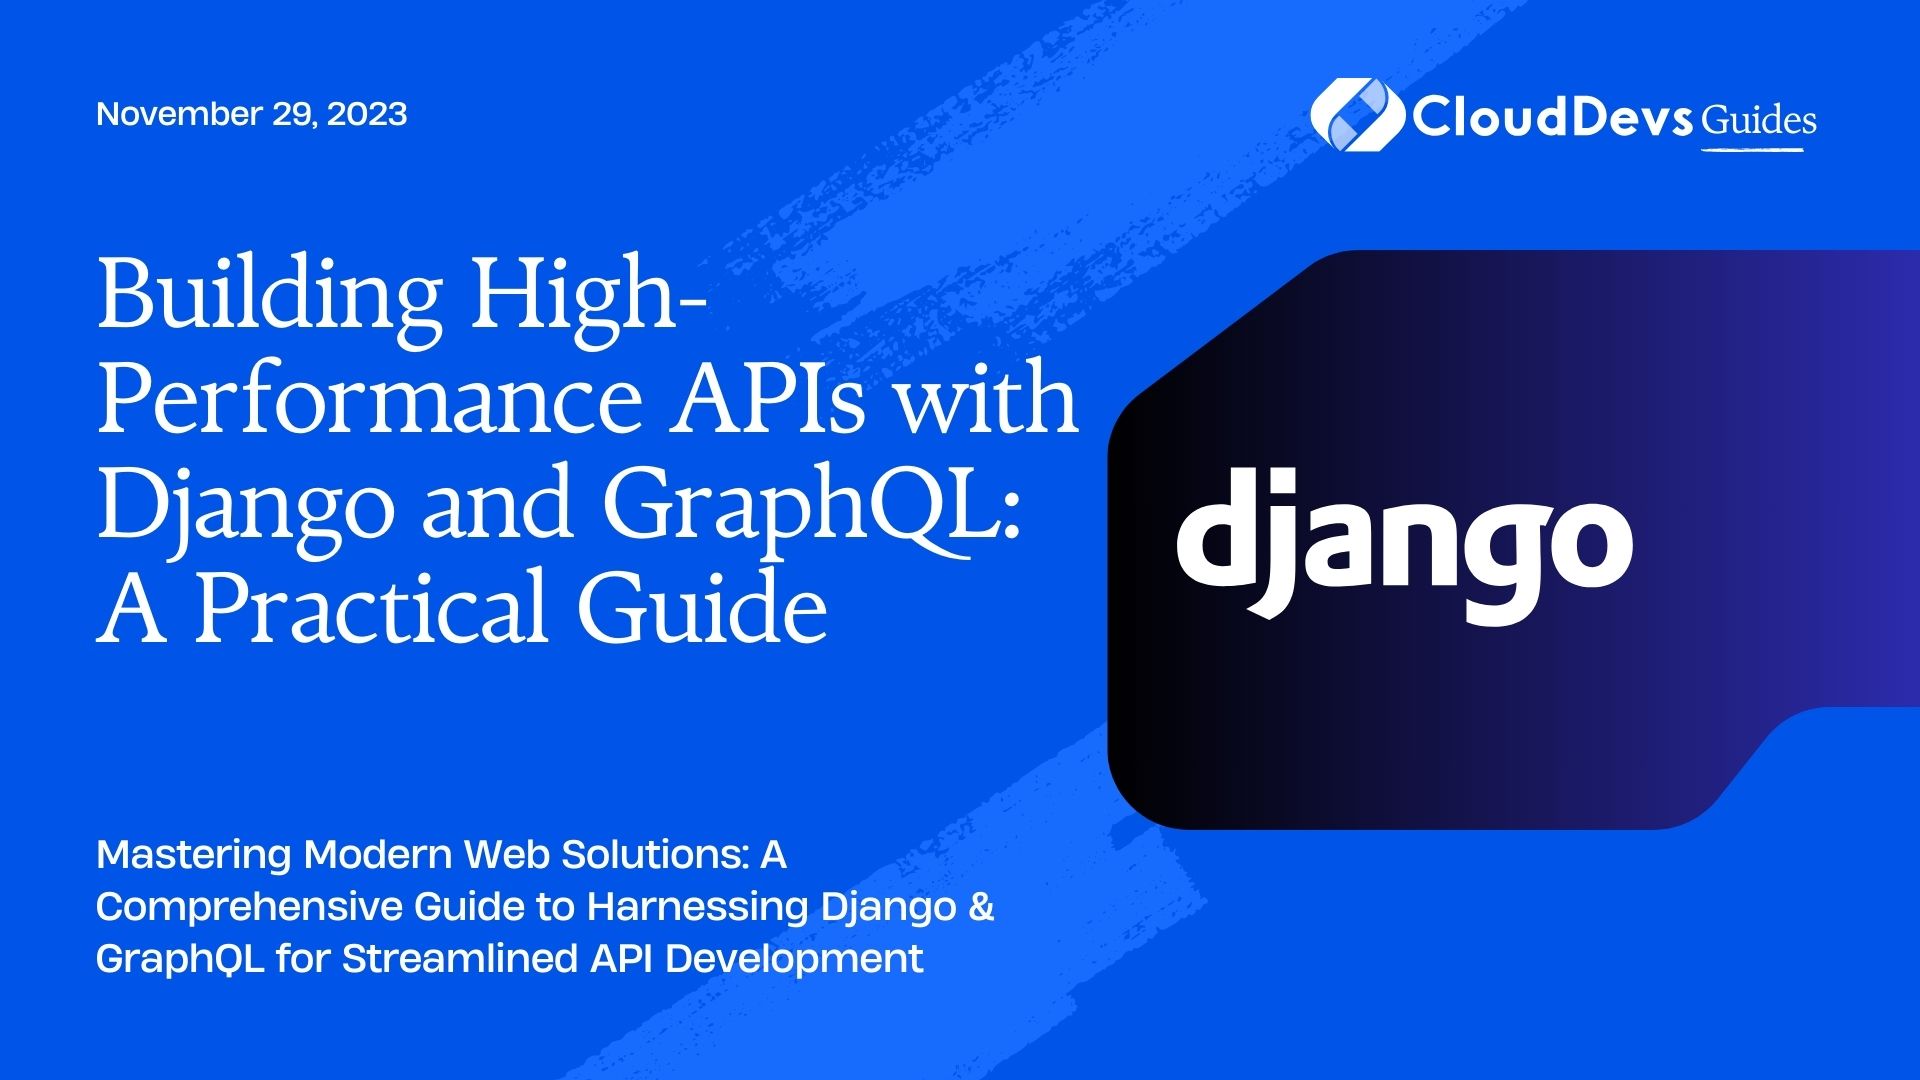 Building High-Performance APIs with Django and GraphQL: A Practical Guide